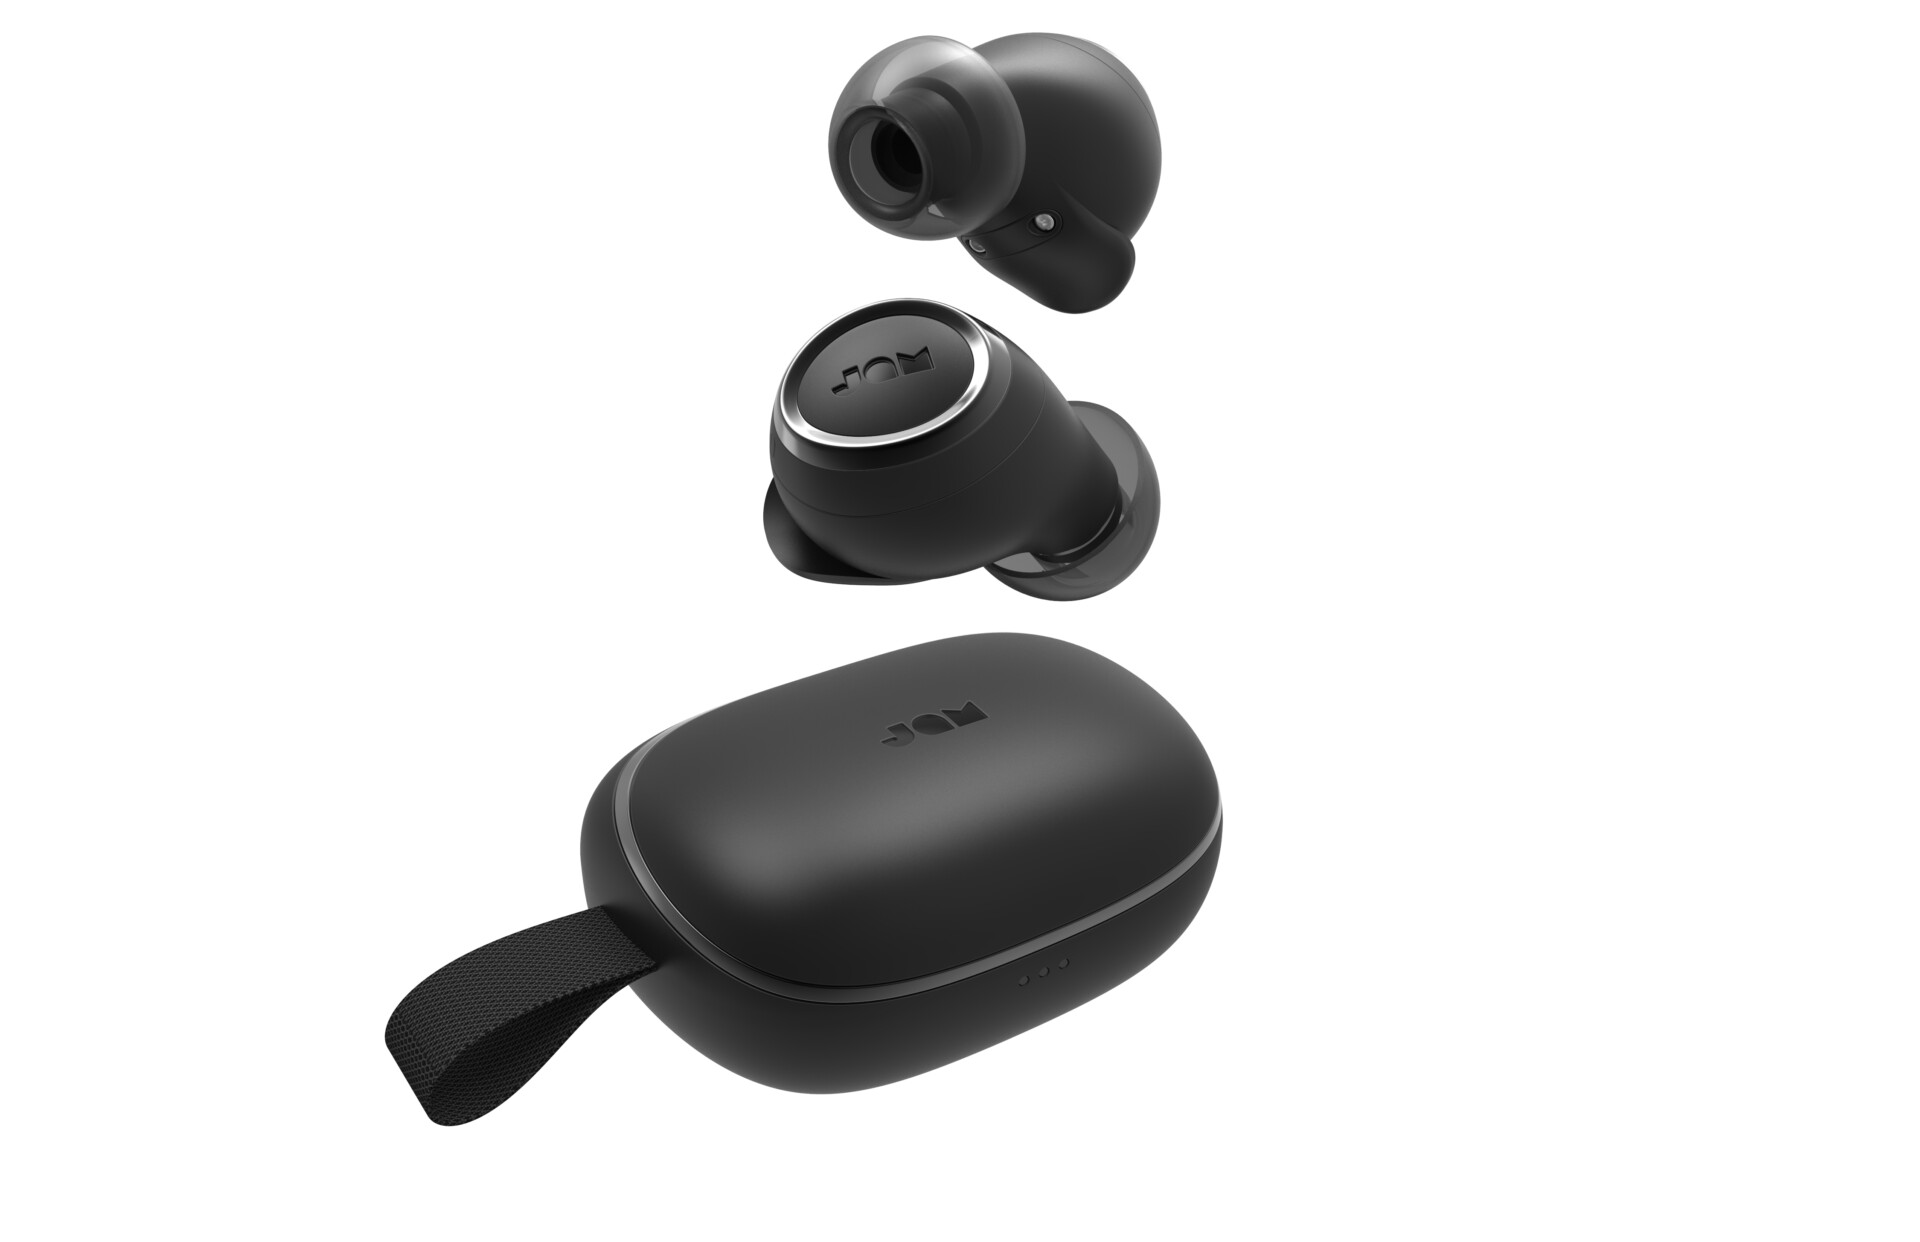 Jam Live Free true wireless earbuds in black on white background. The case is also pictured below the earbuds.